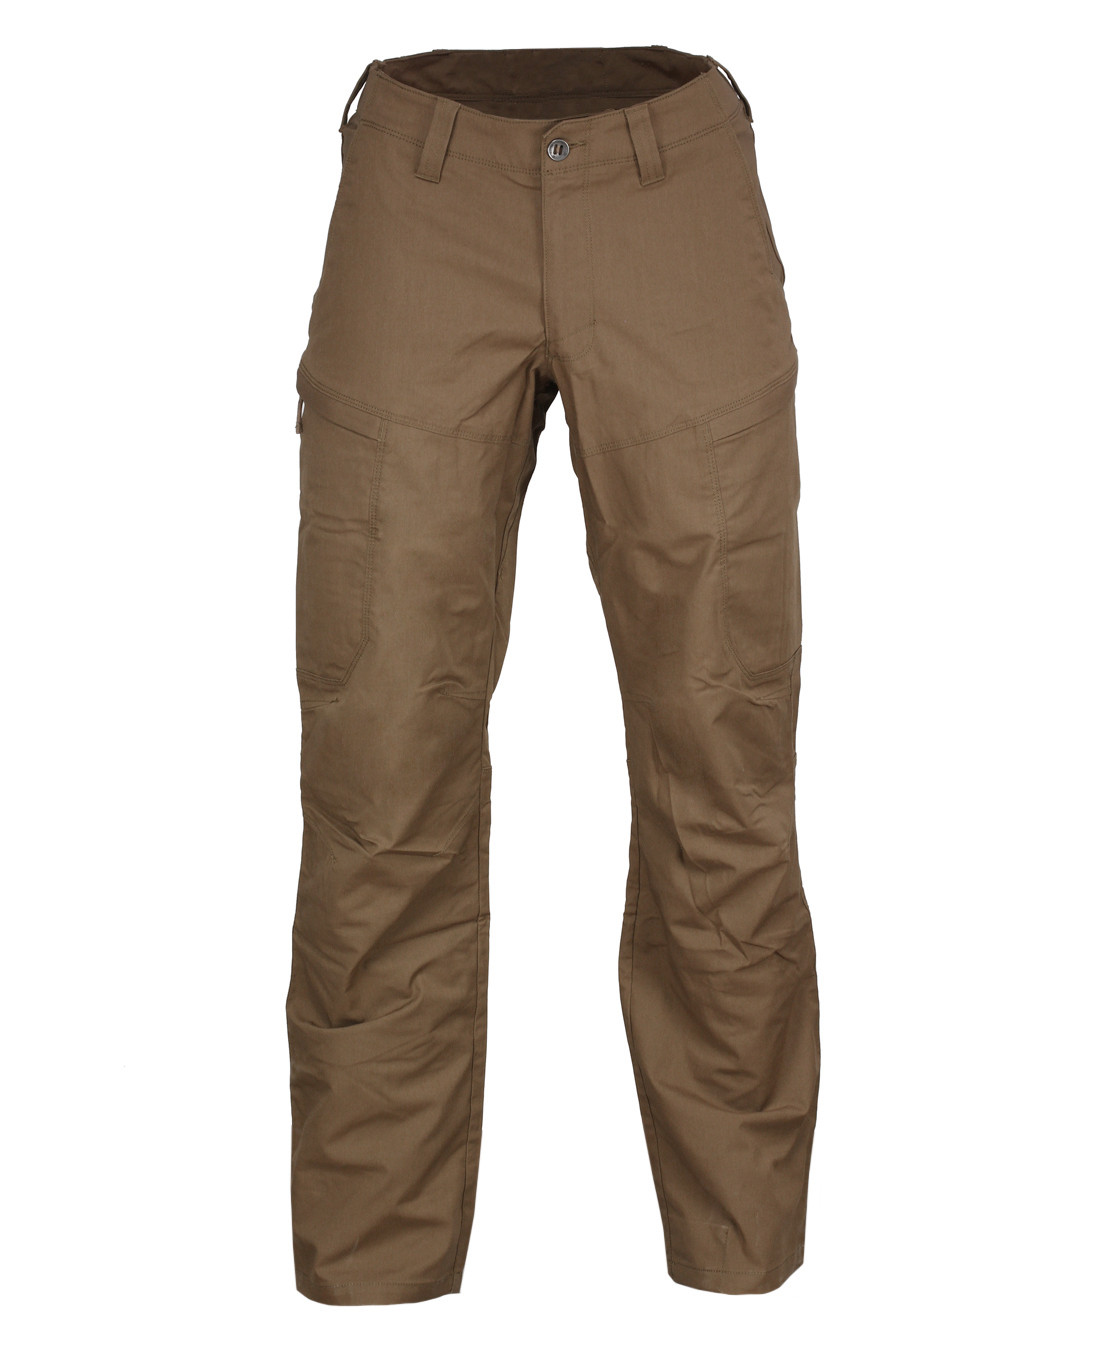 5.11 apex trousers